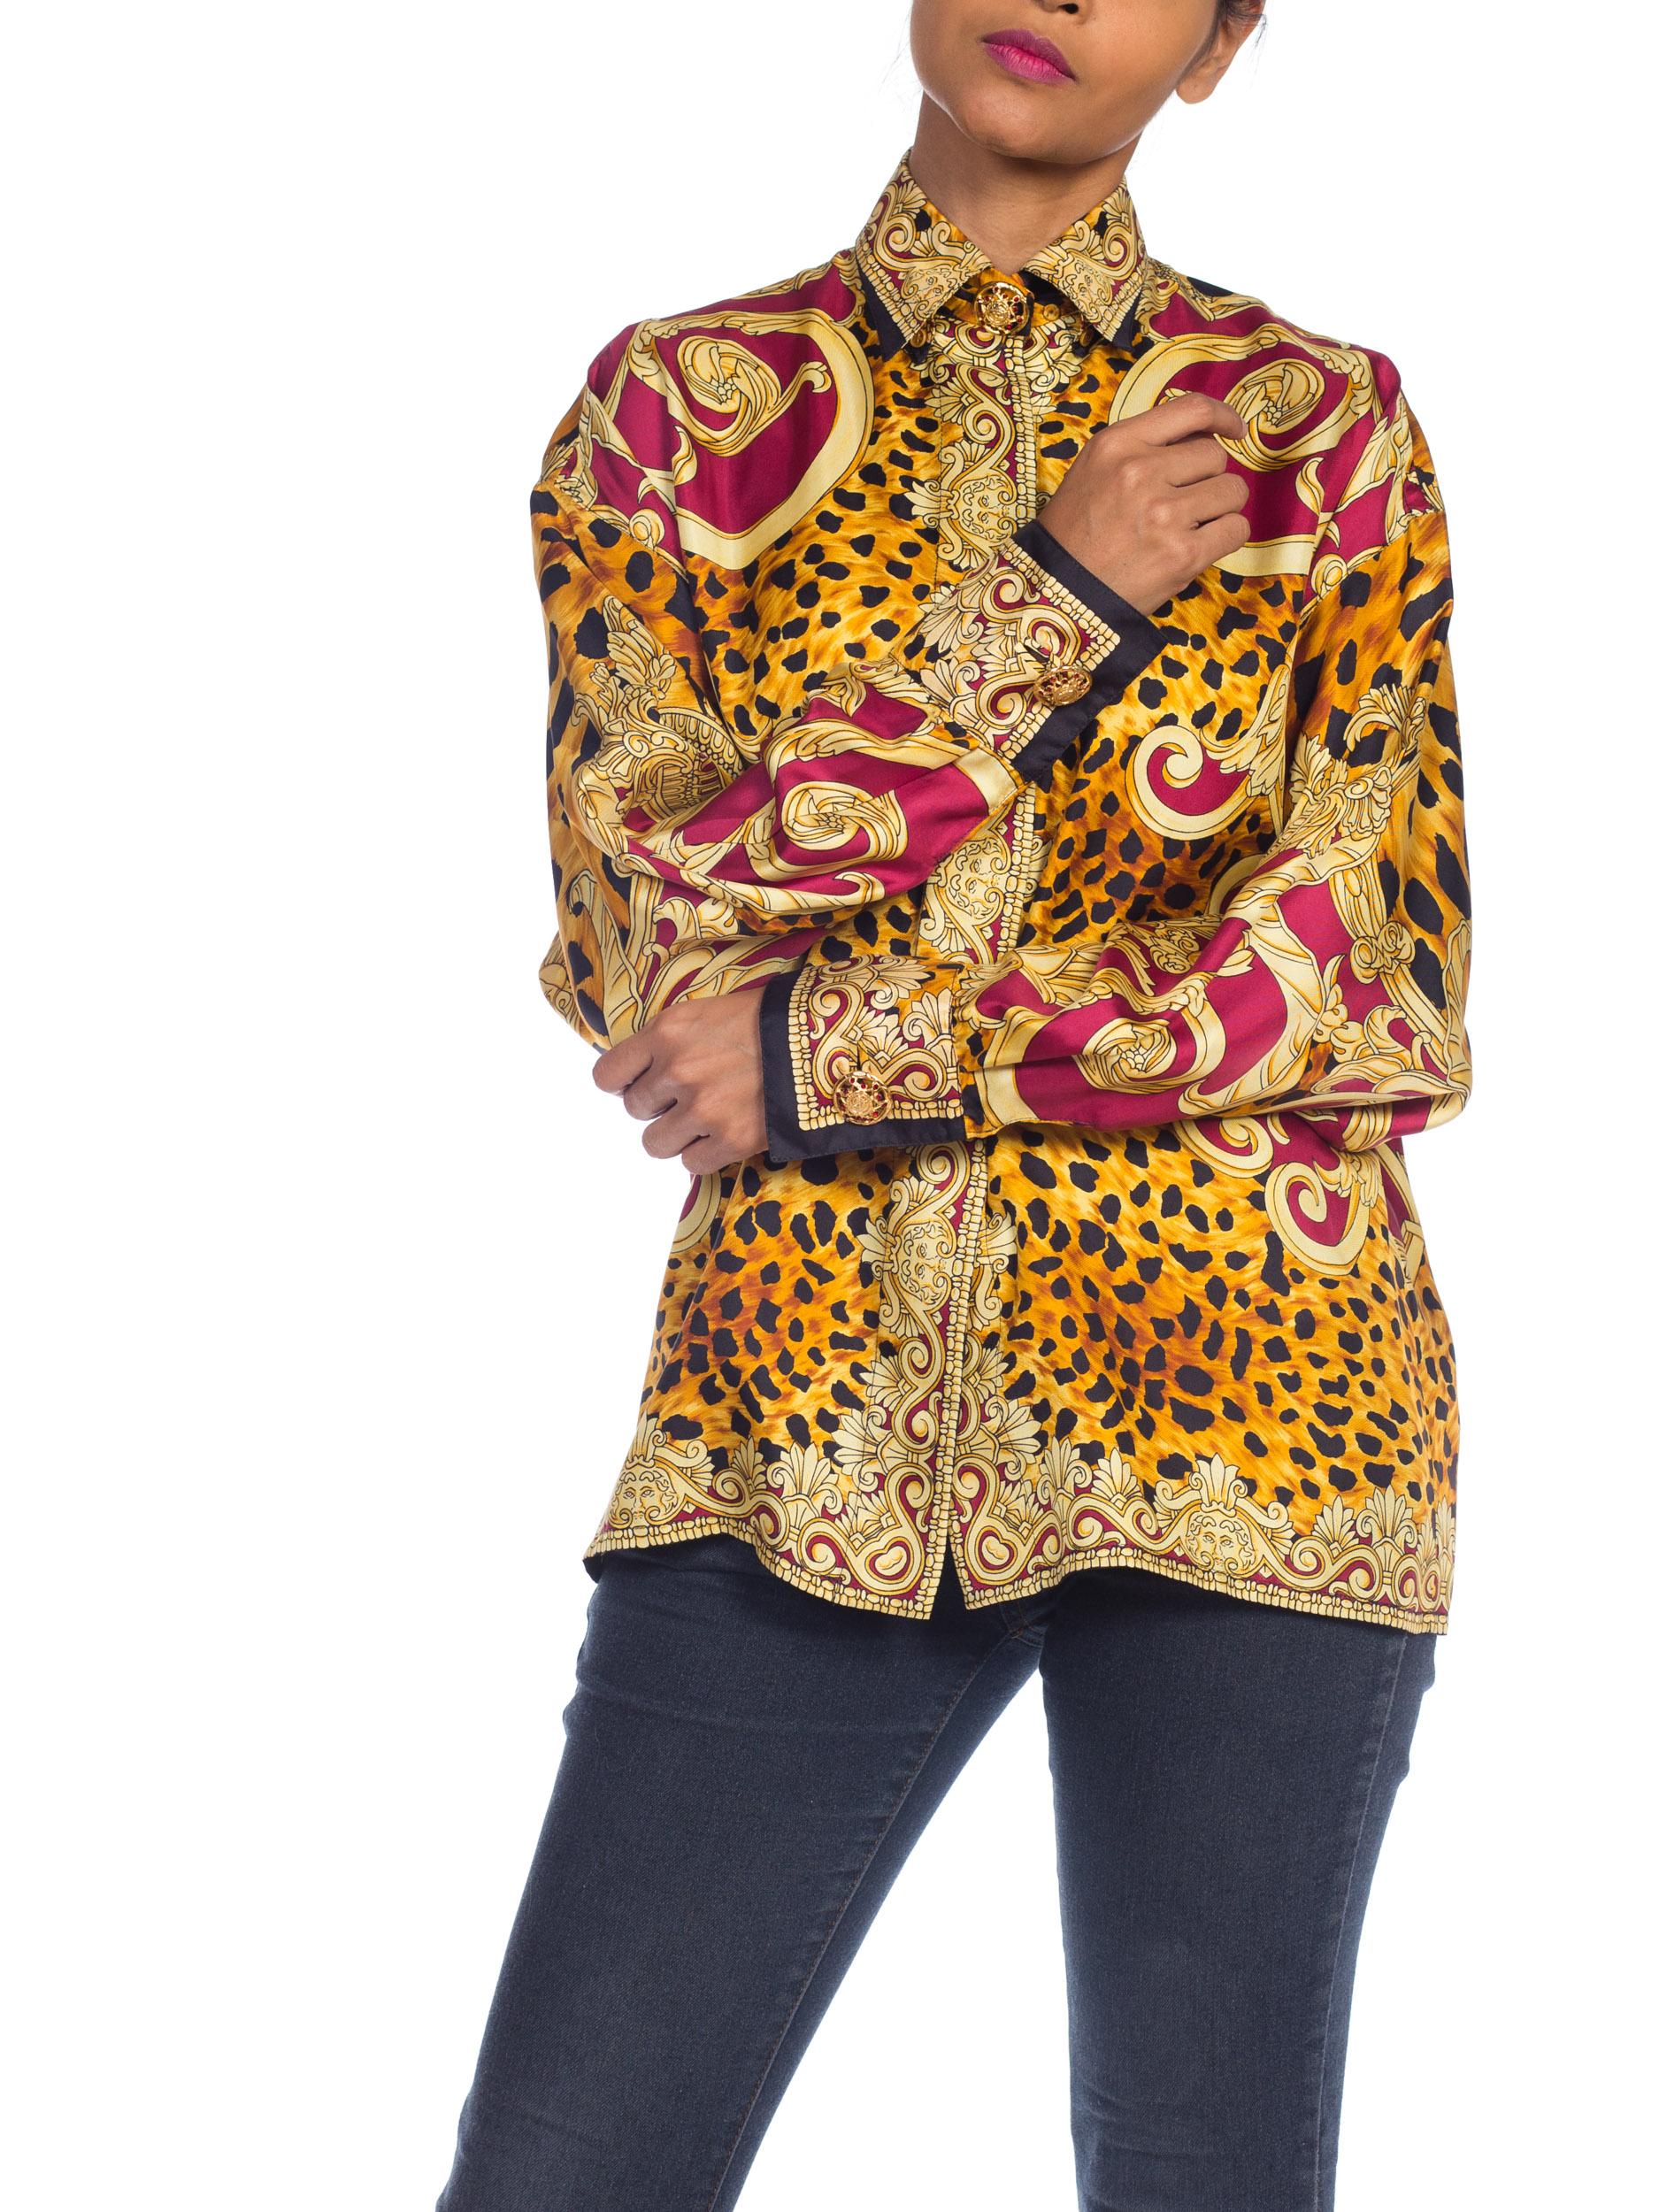 1990S GIANNI VERSACE Gold Baroque & Leopard Silk Shirt With Crystals Buttons 9